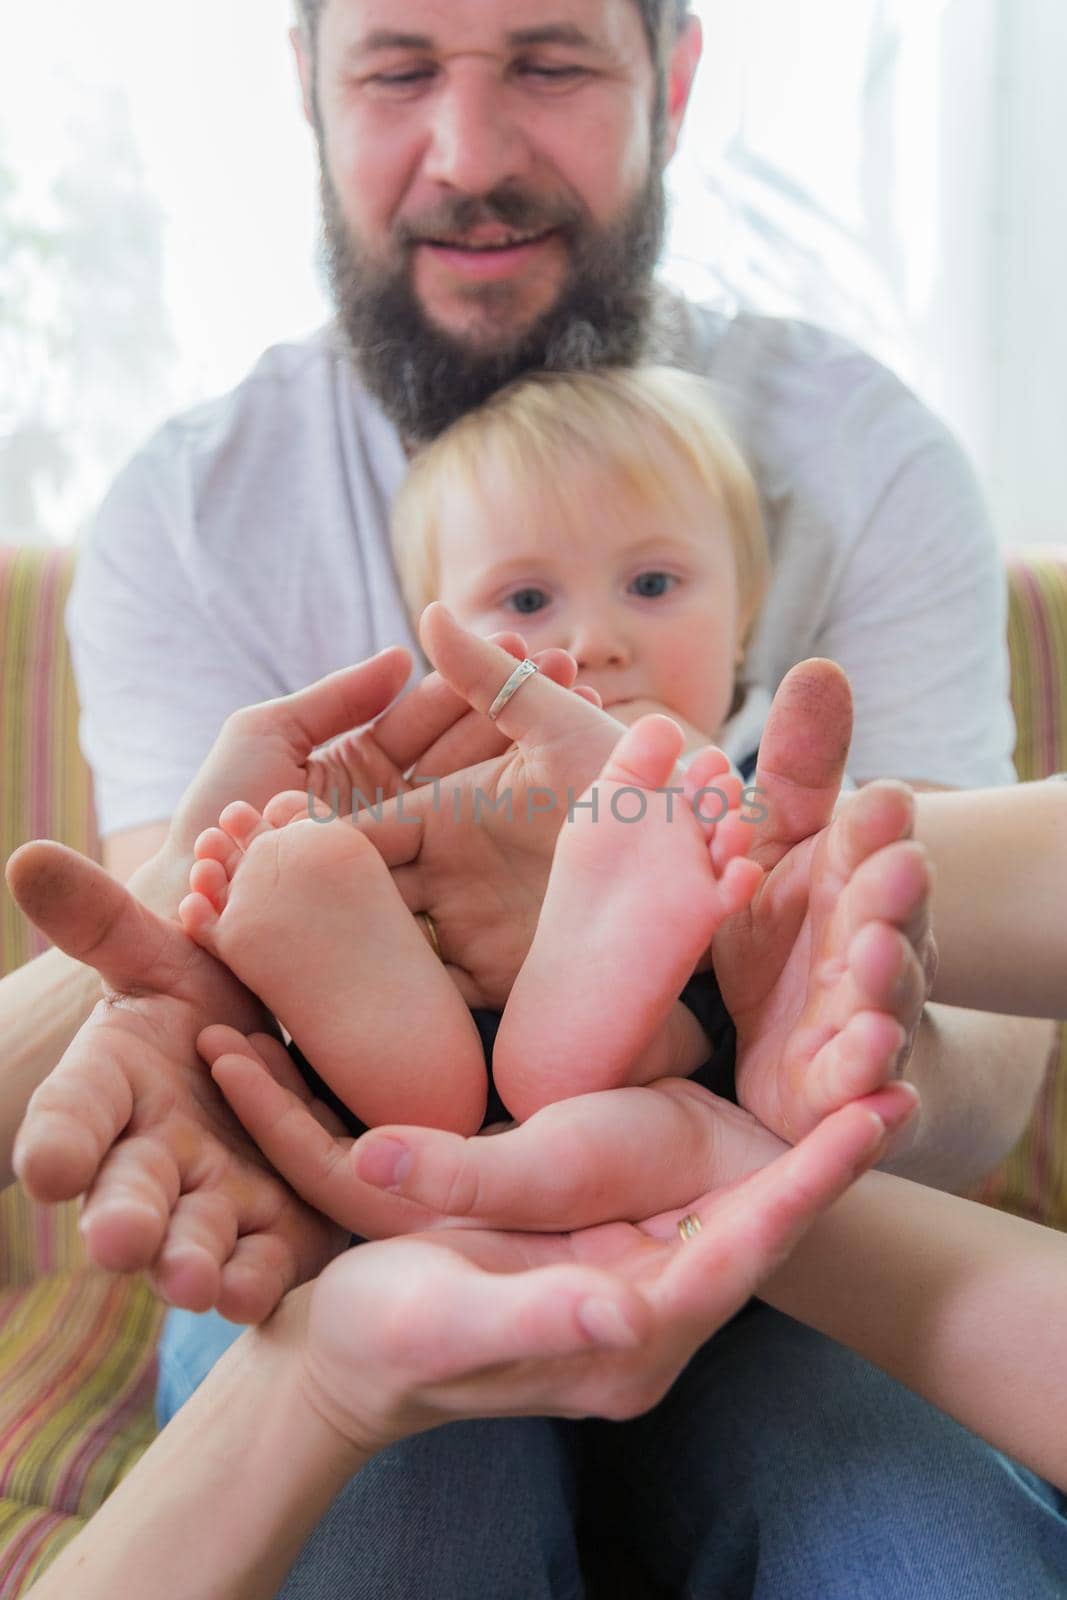 The whole family, parents and children hold the baby's heels in the palms of the hands.